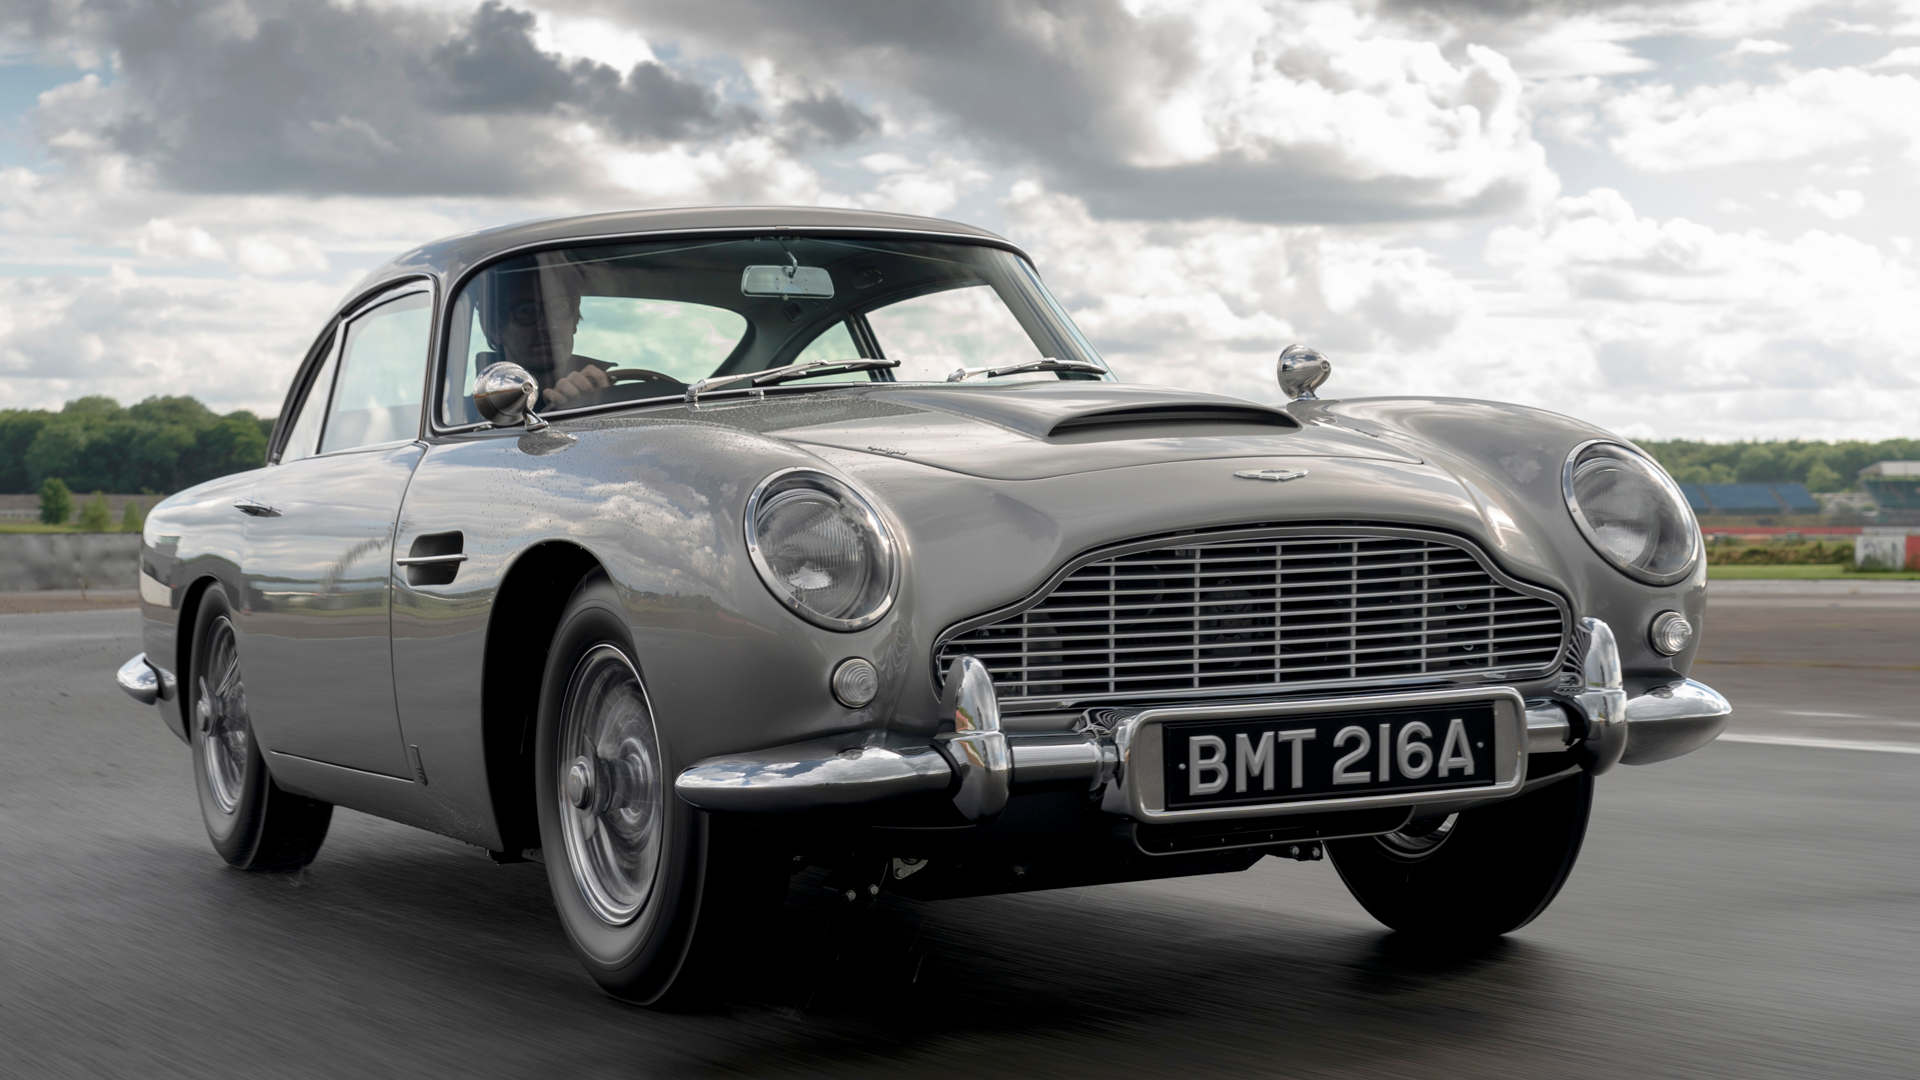 You Can Buy New Factory Engine Parts for Your Classic Aston Martin DB5 Now